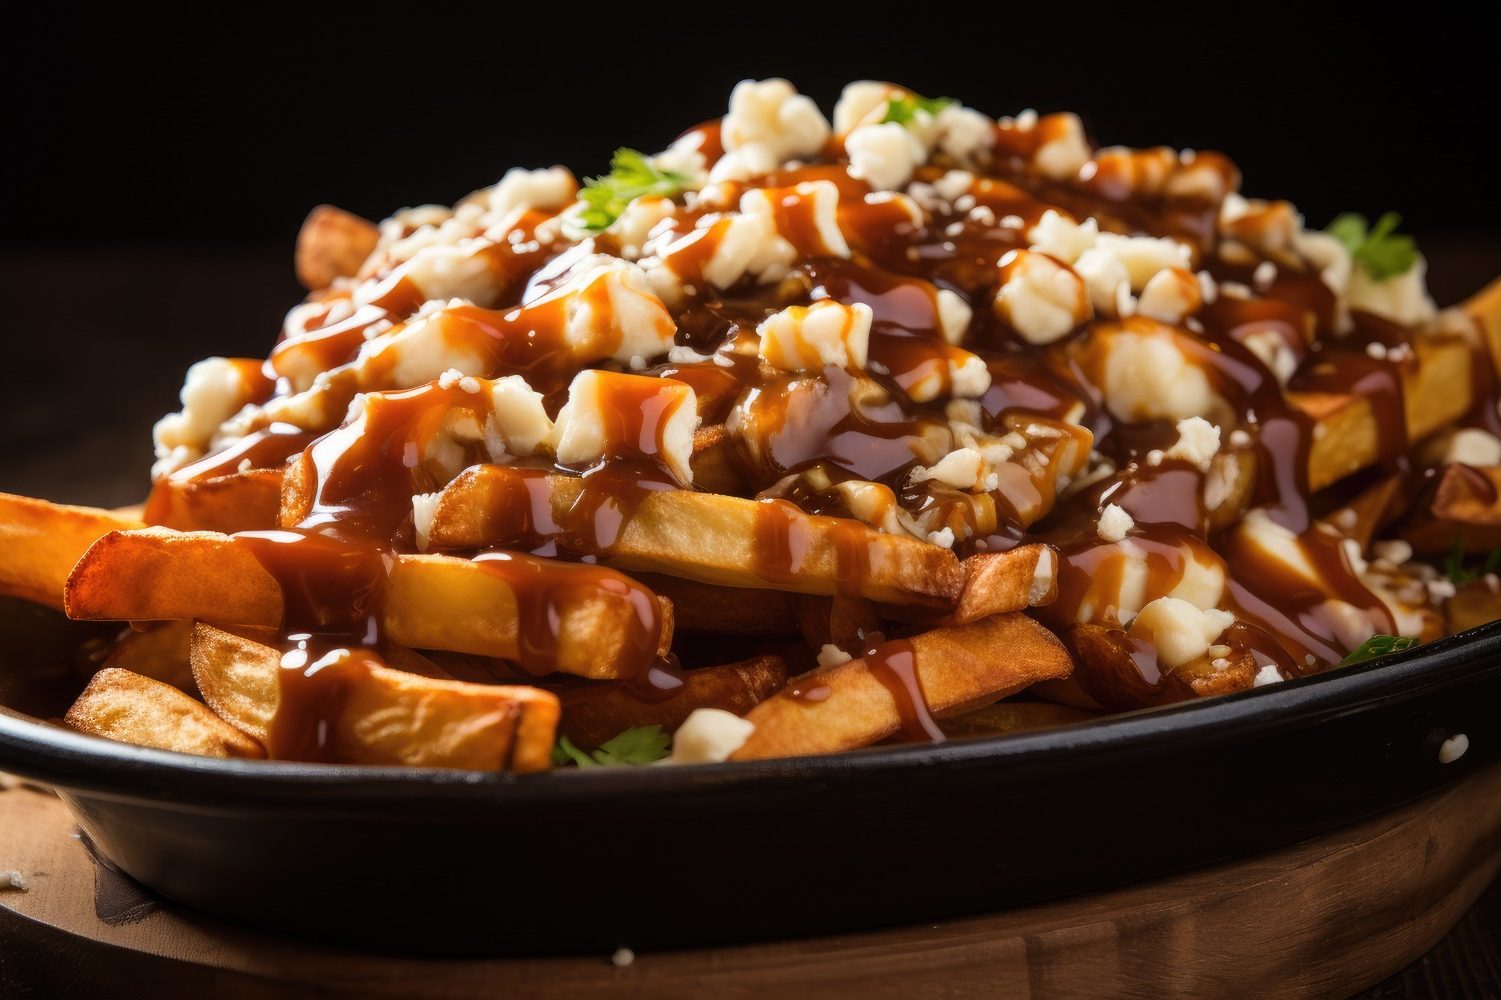 Satisfy your cravings with our POUTINE options. Crispy Fries, rich Gravy, Cheese Curds, and your choice of Protein create the perfect comfort food experience at Anas Shawarma.